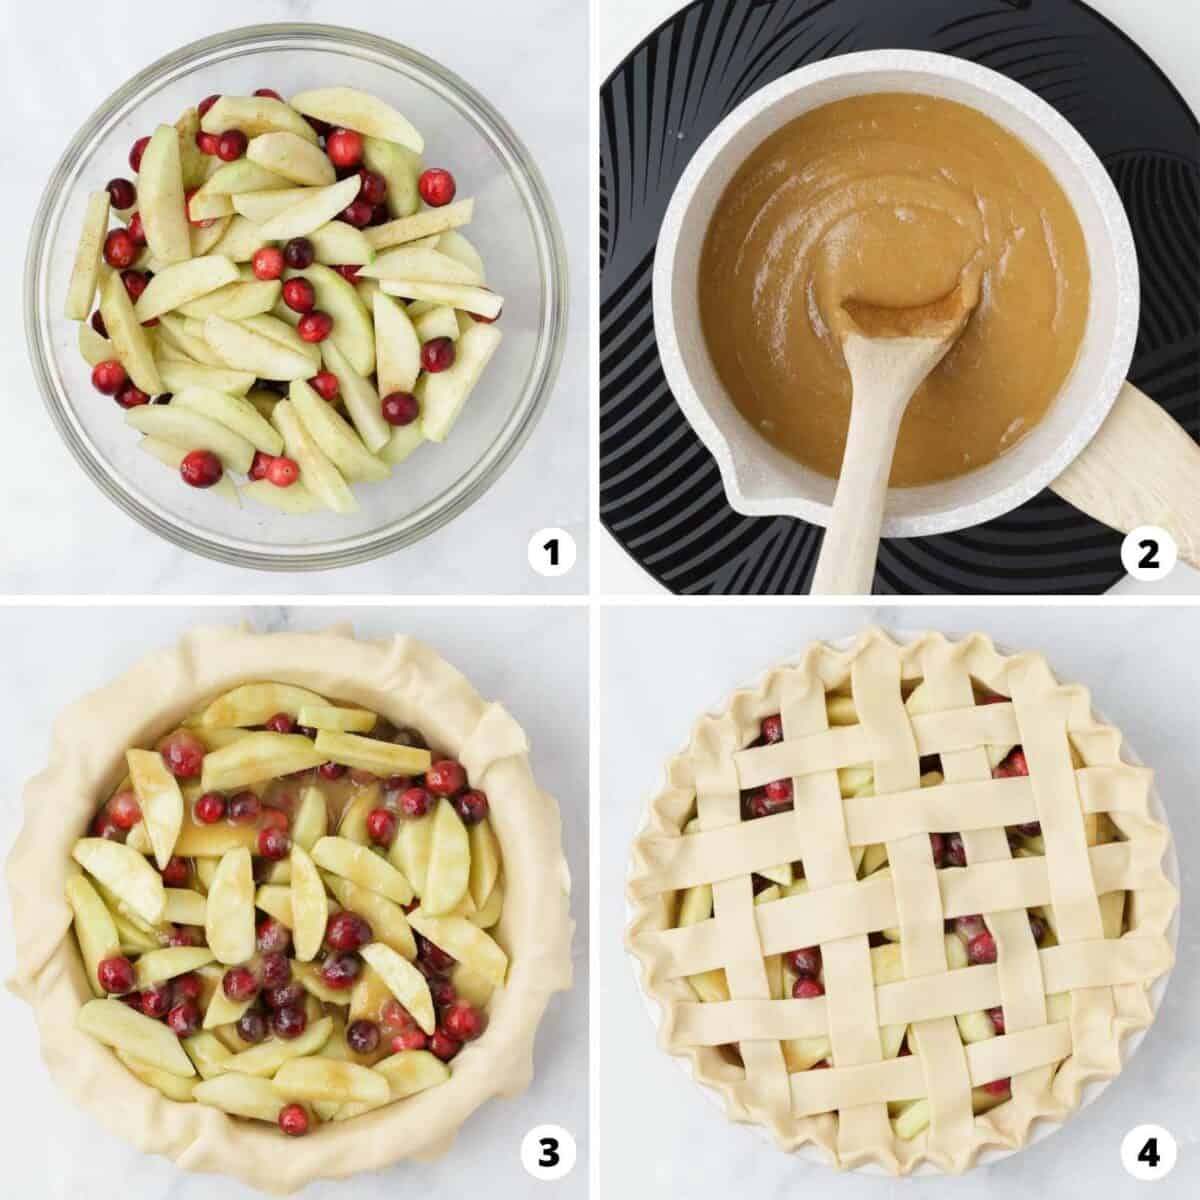 Showing how to make the apple cranberry pie in a 4 step collage.